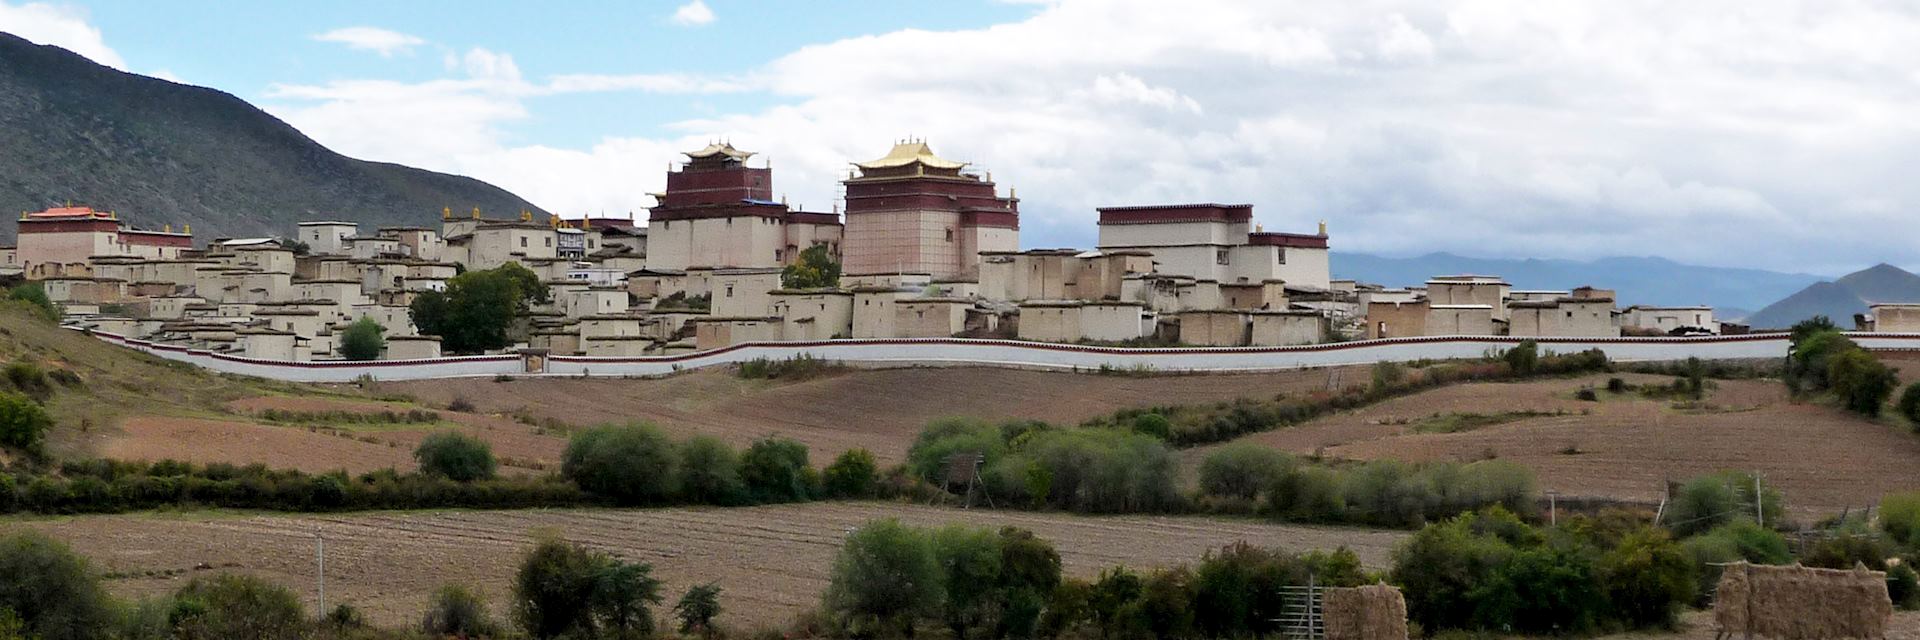 View of Songzanlin Monastery from Songtsam Retreat, Yunnan province